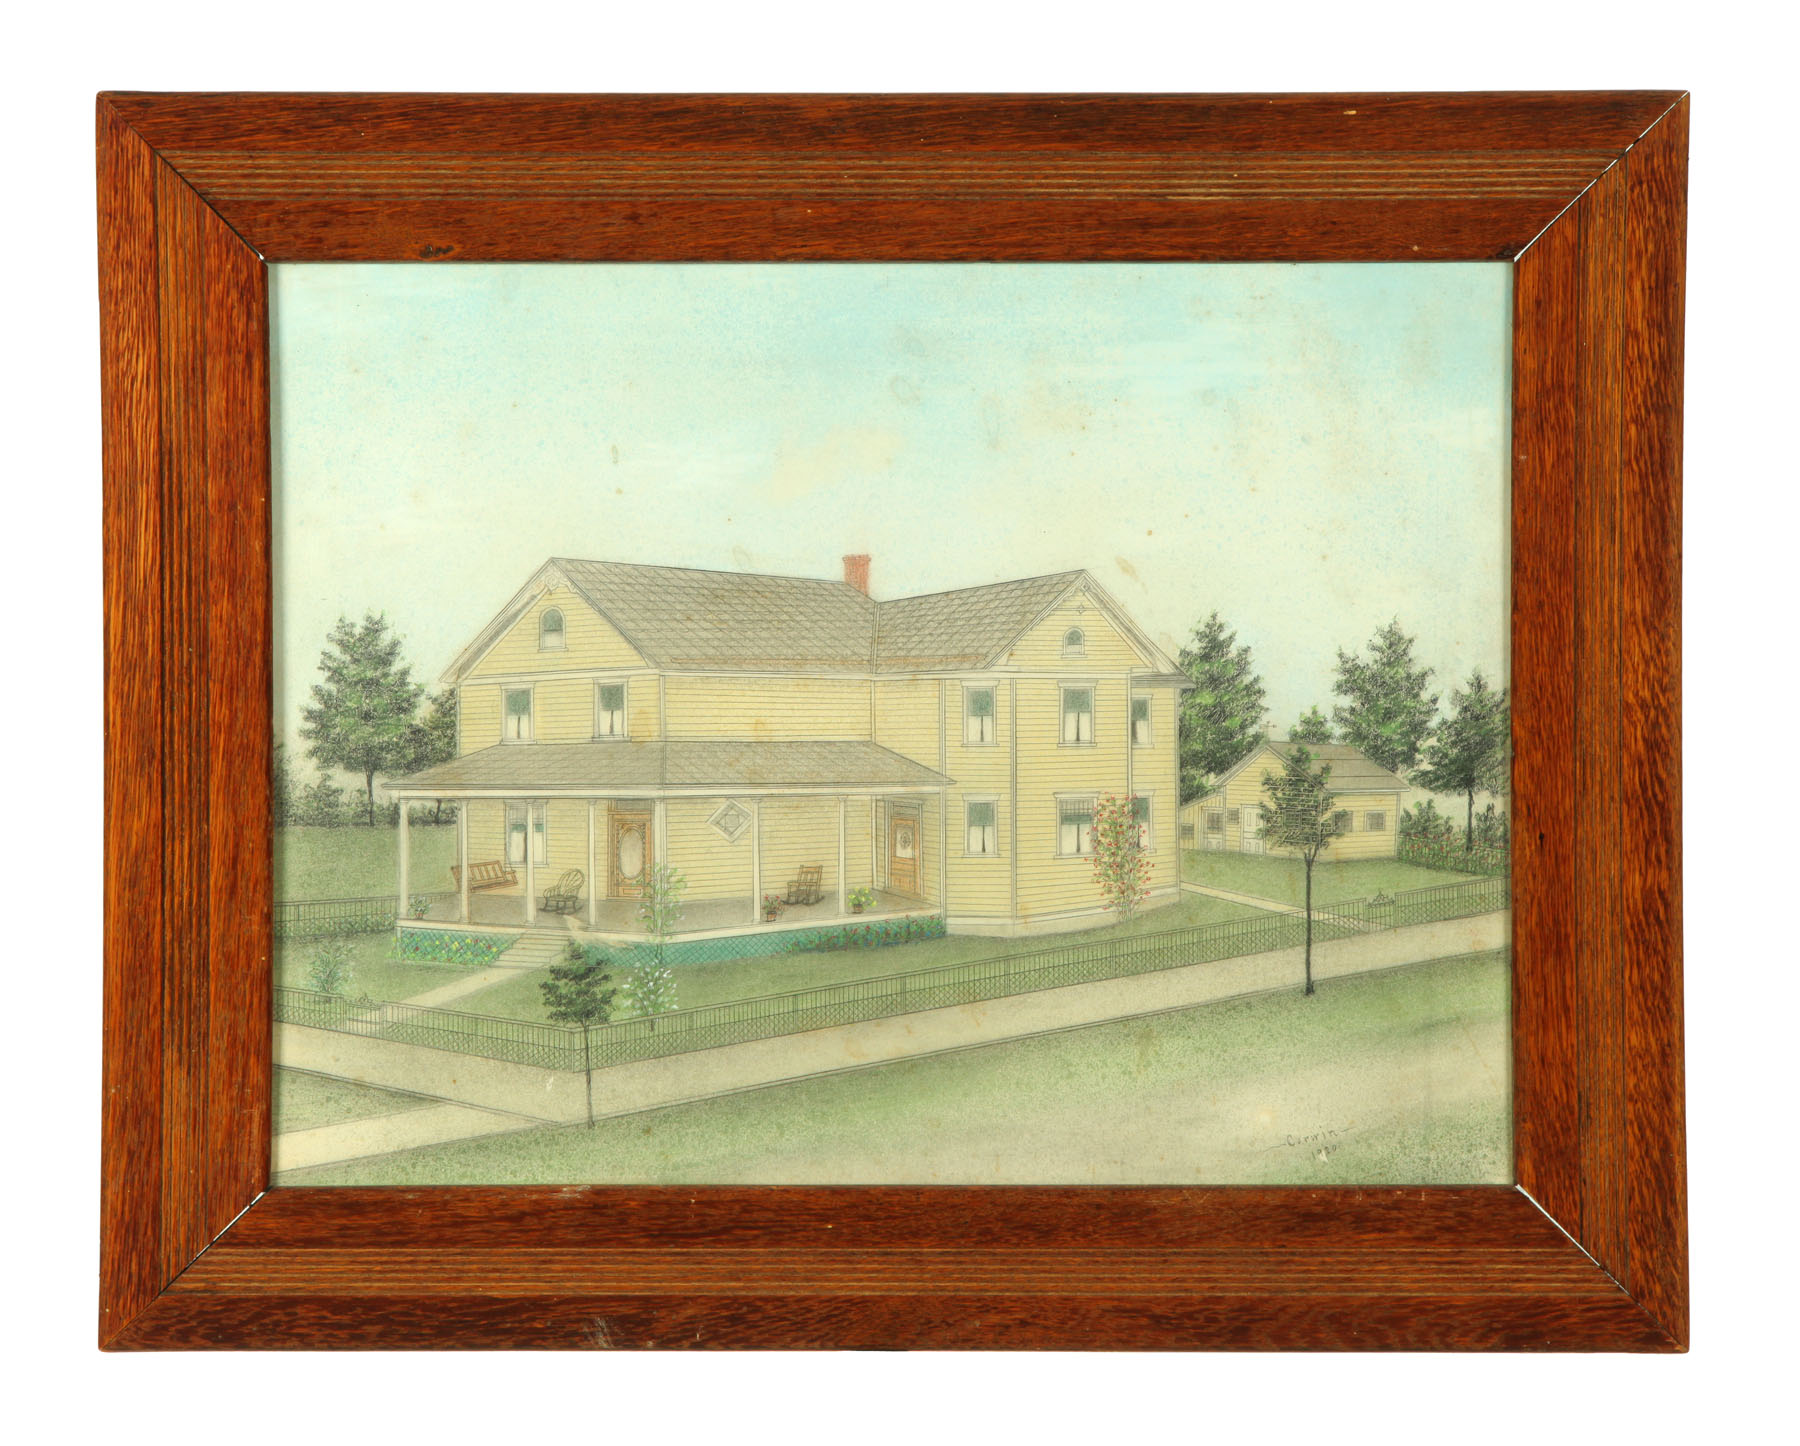 DRAWING OF A YELLOW HOUSE (AMERICAN